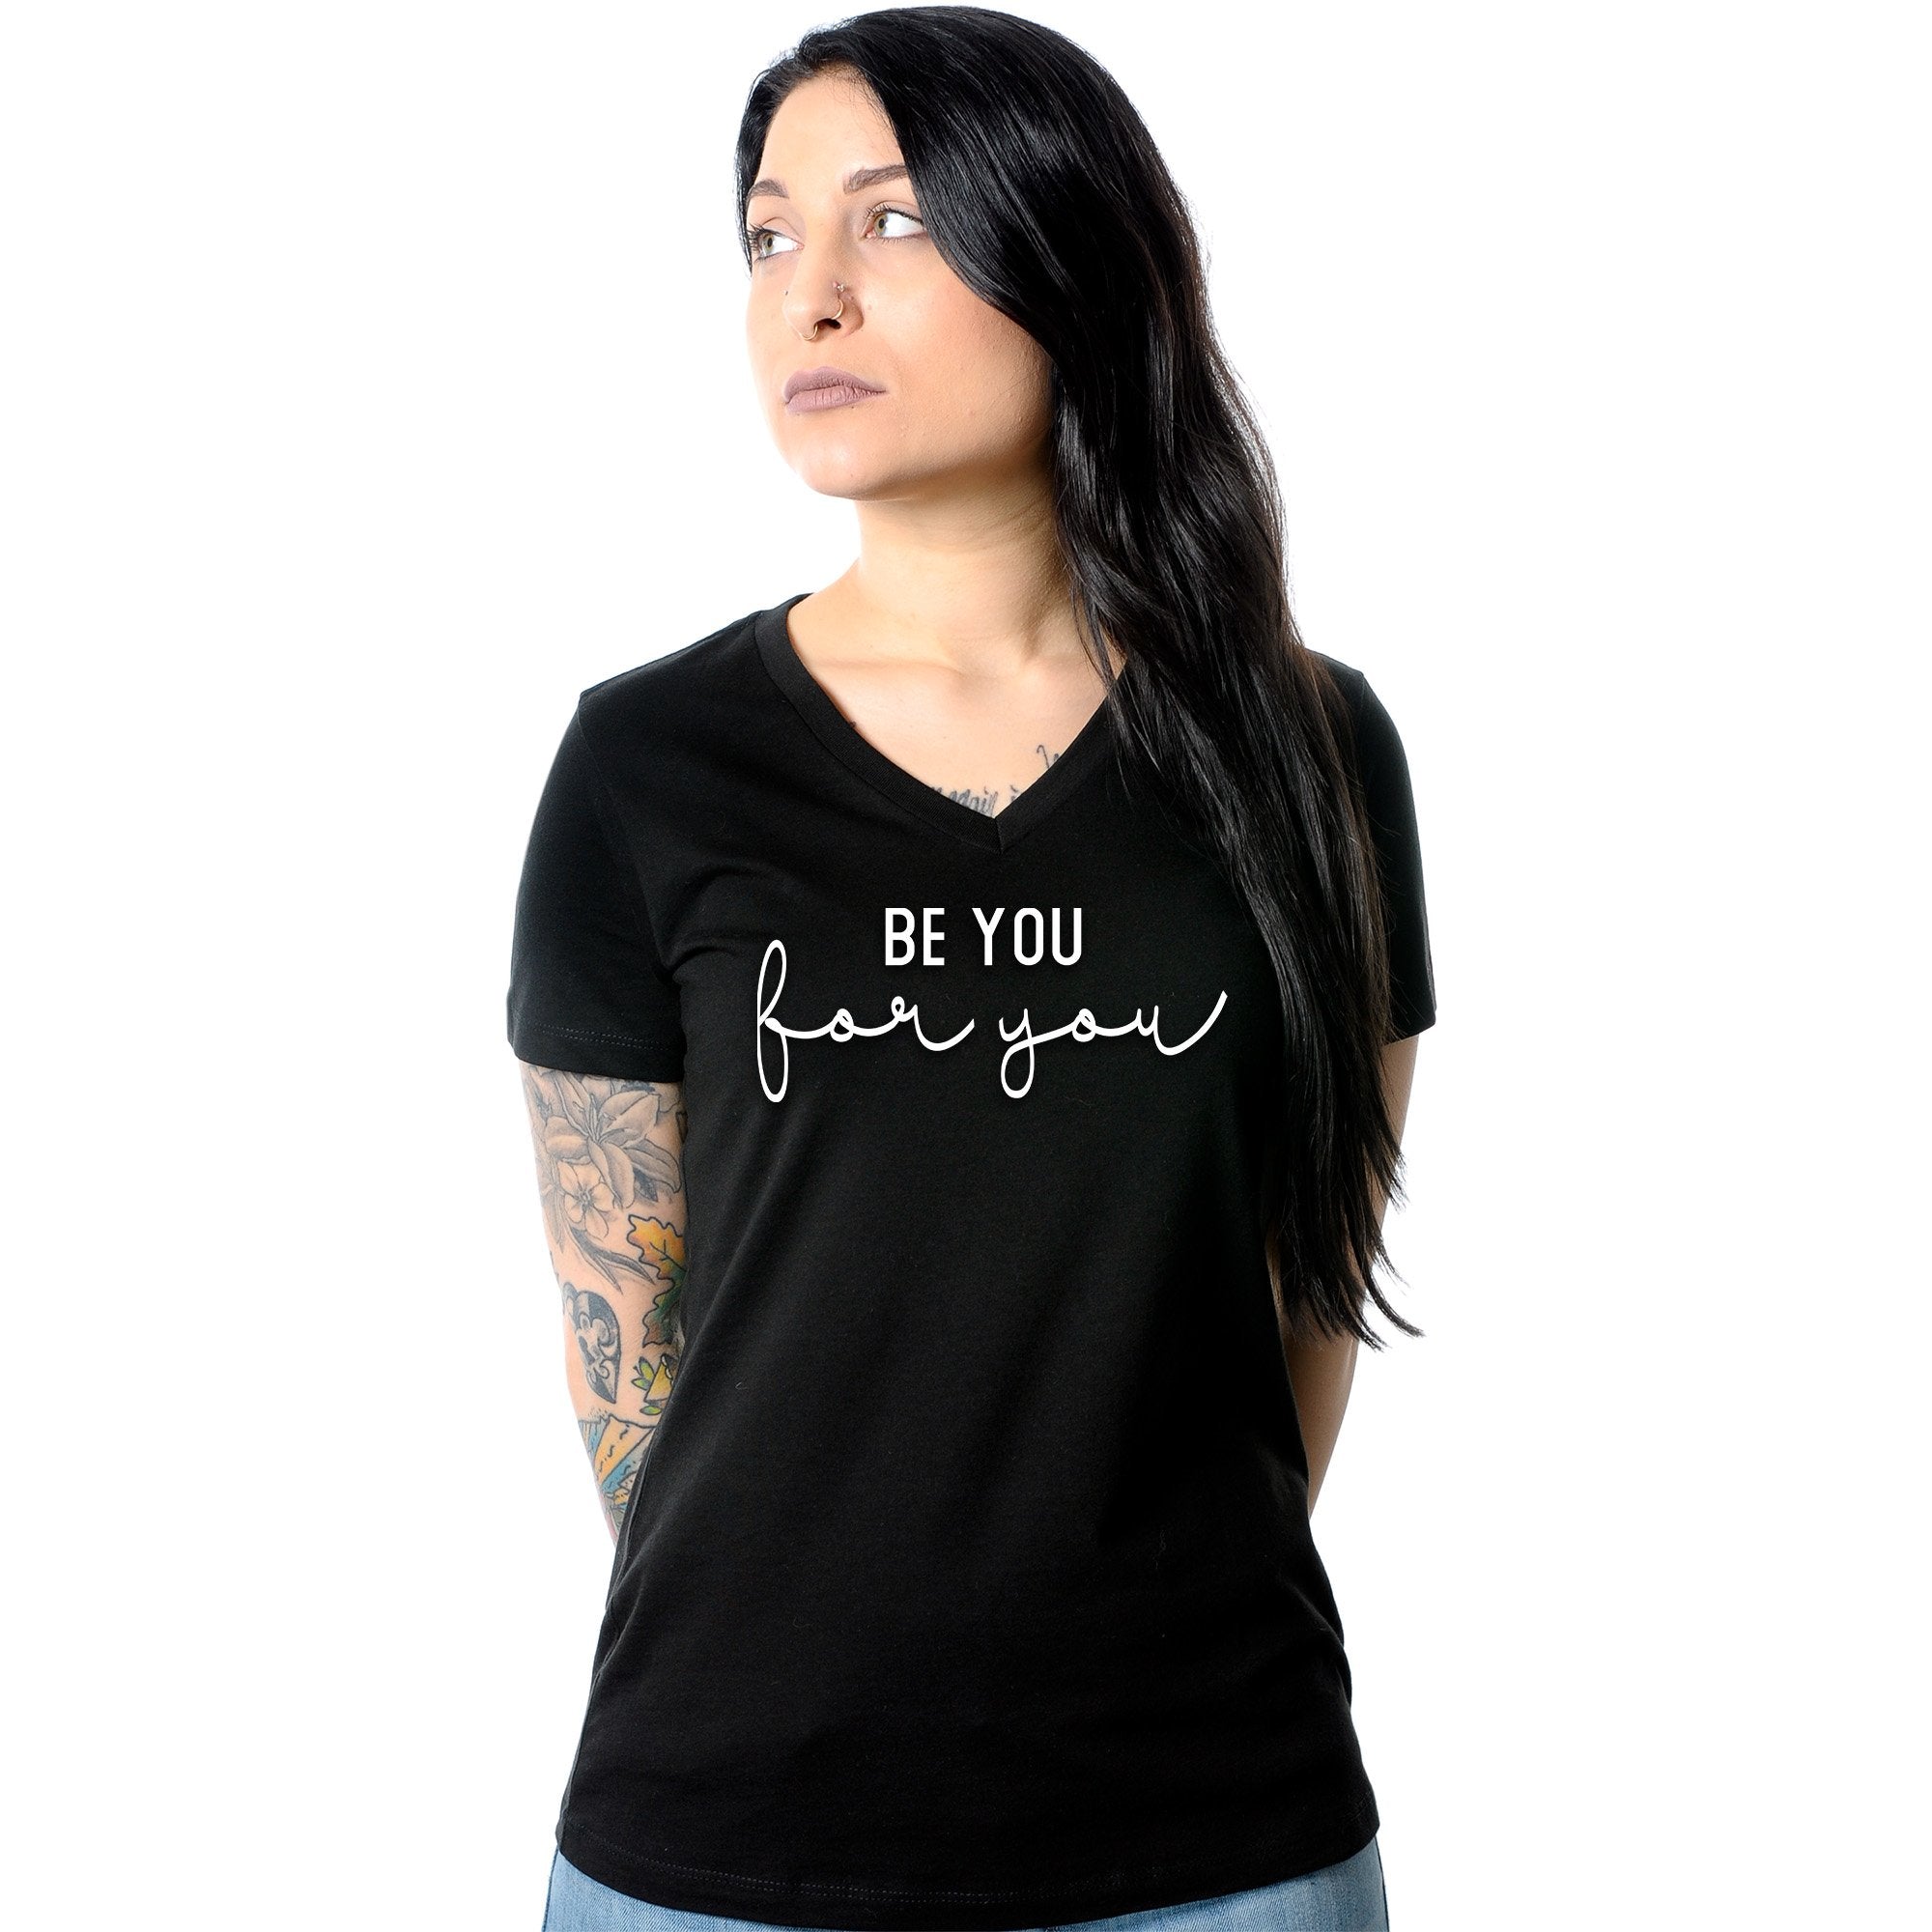 Be You, For You Black Tapered V-Neck Tee Shirt